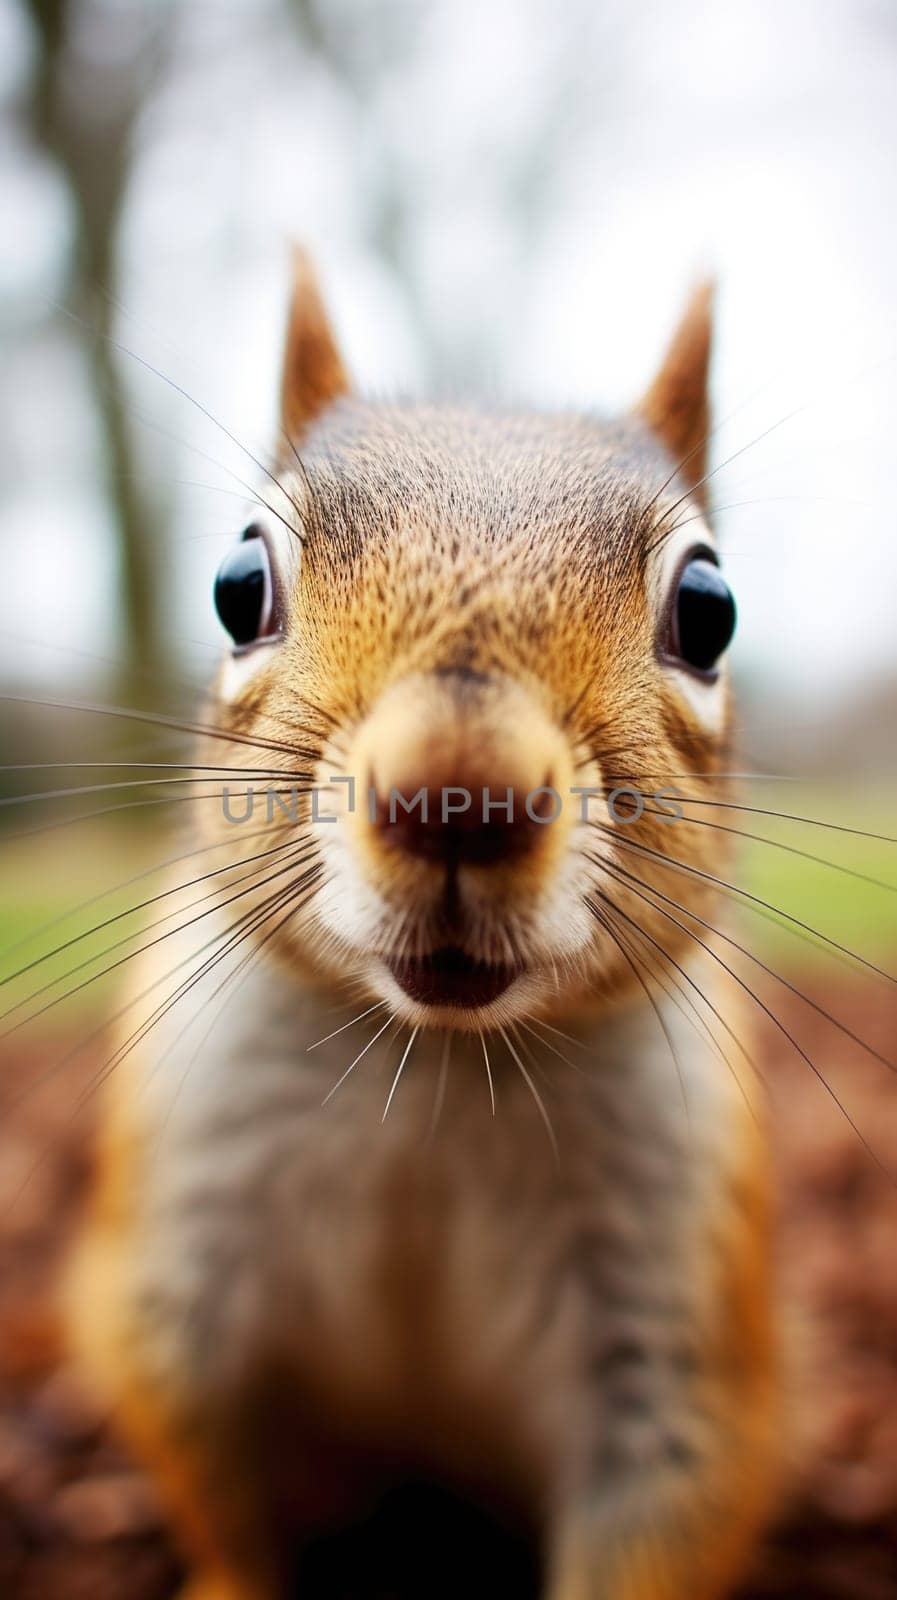 A close up of a squirrel looking at the camera, AI by starush